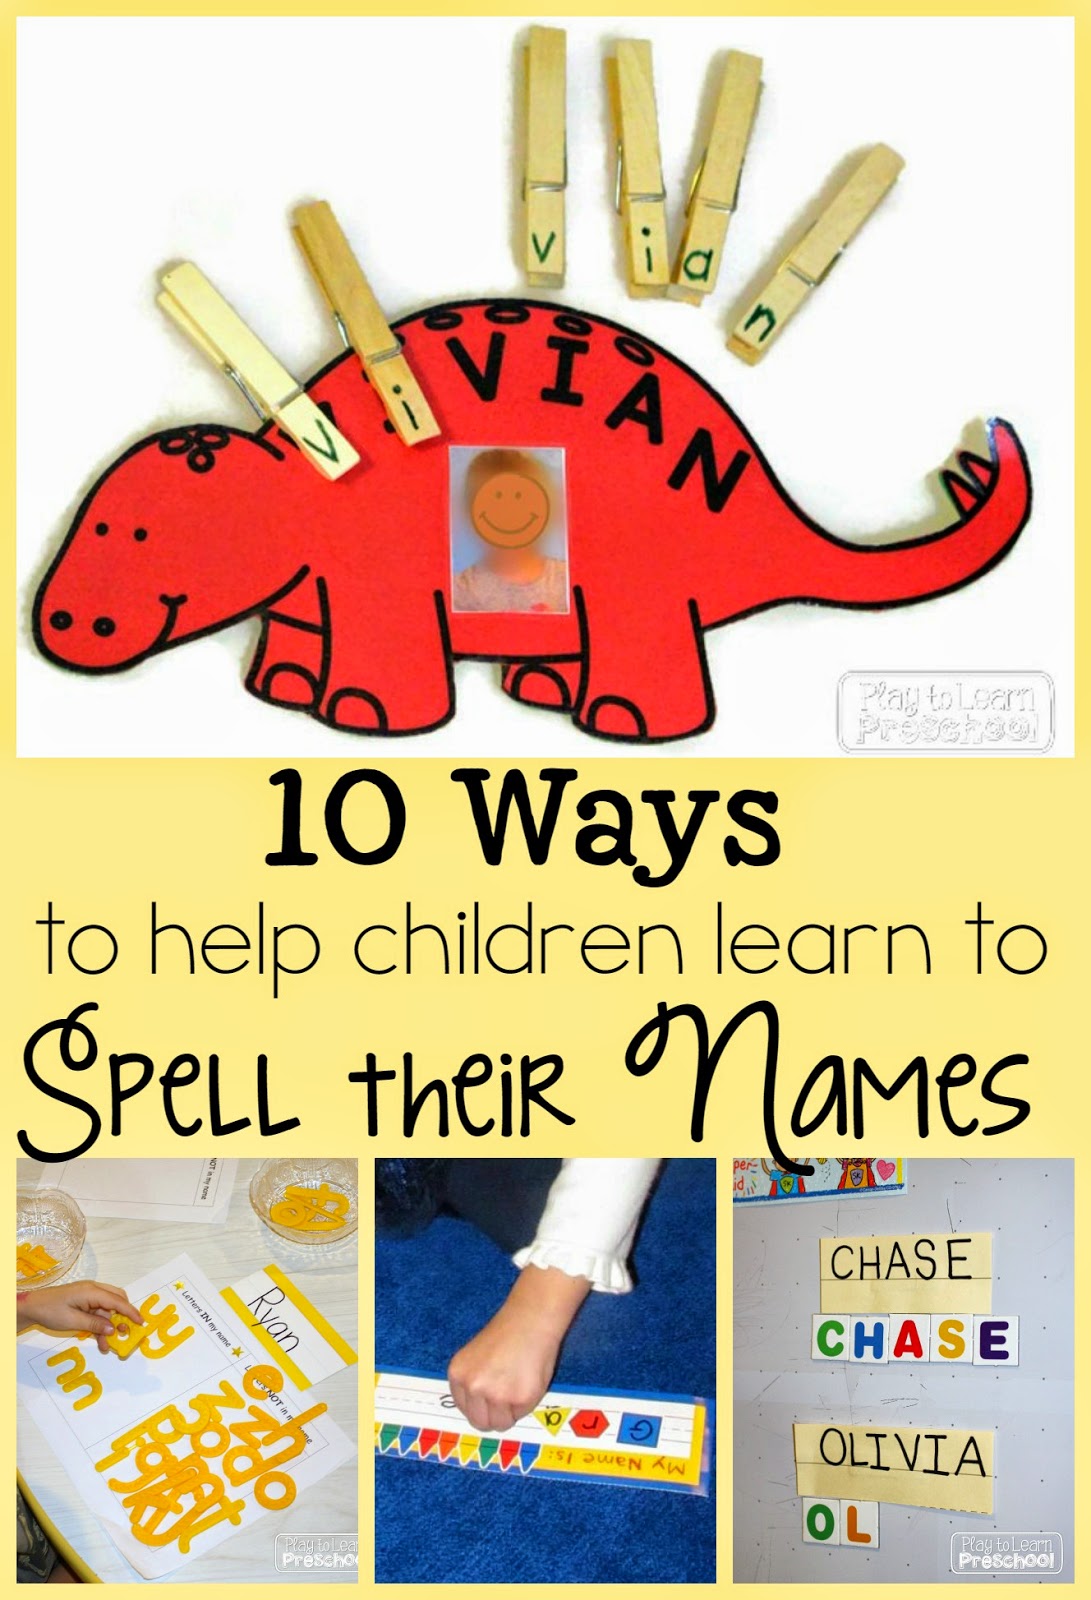 Play to Learn Preschool Writing our Names